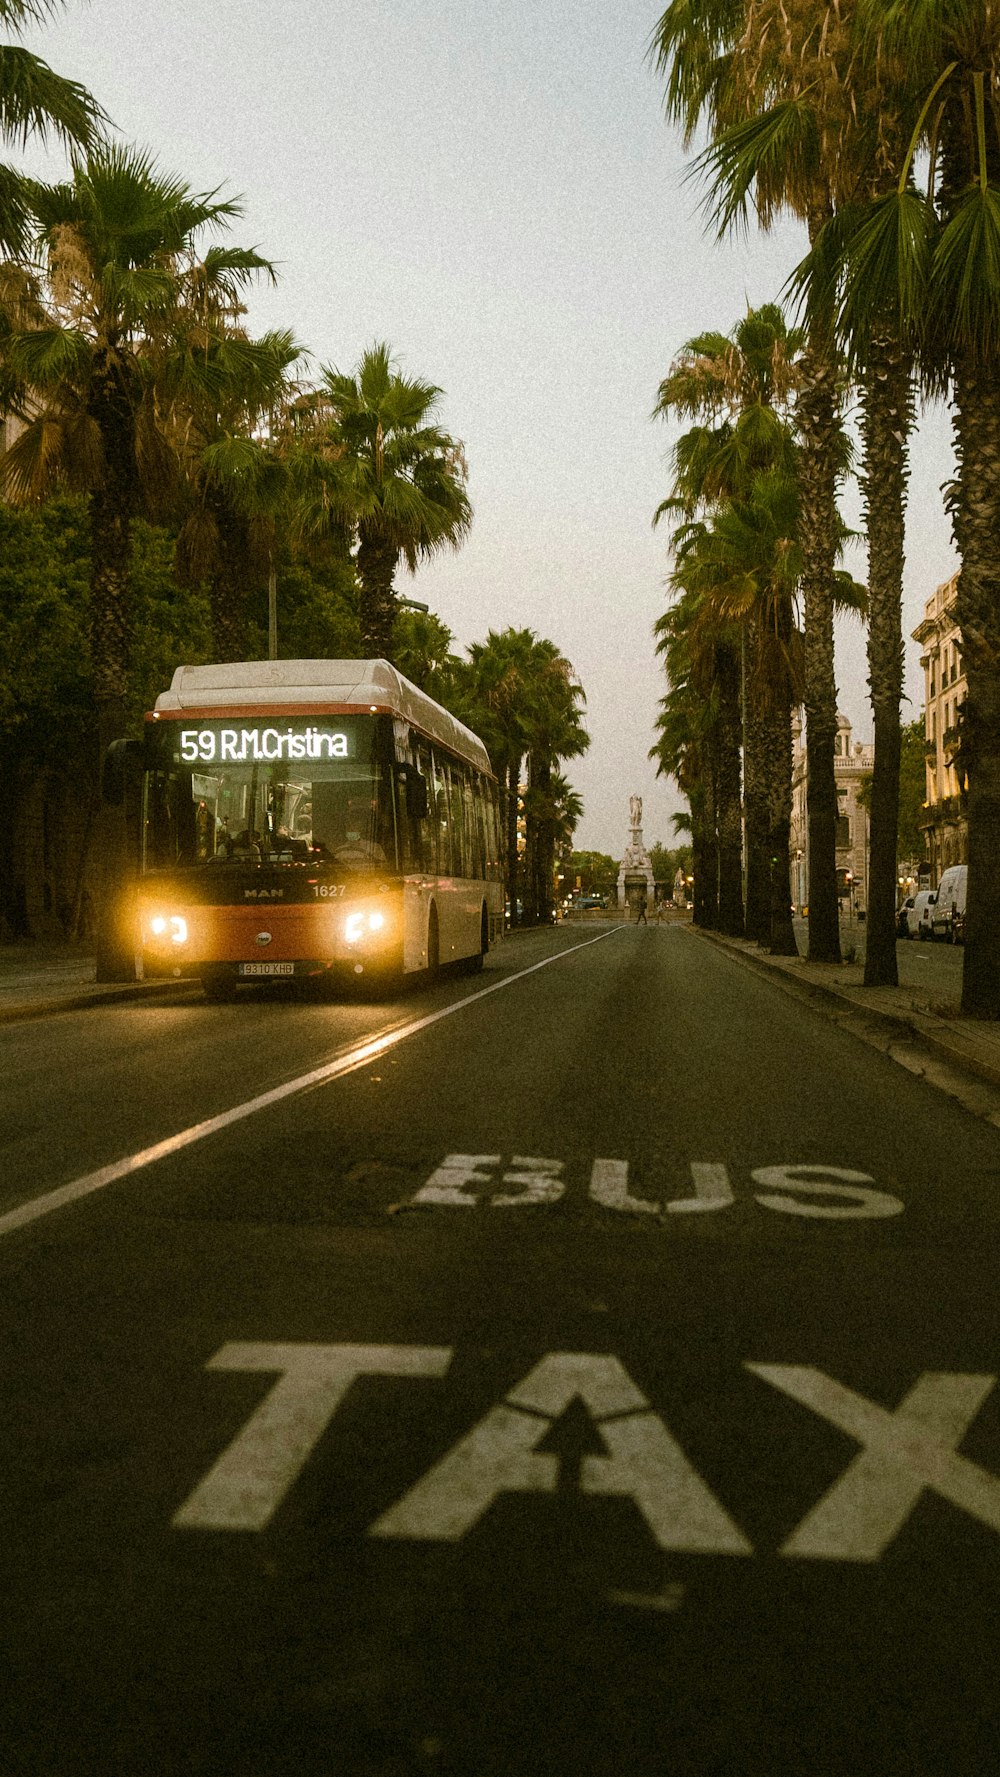 a bus driving down a street next to palm trees